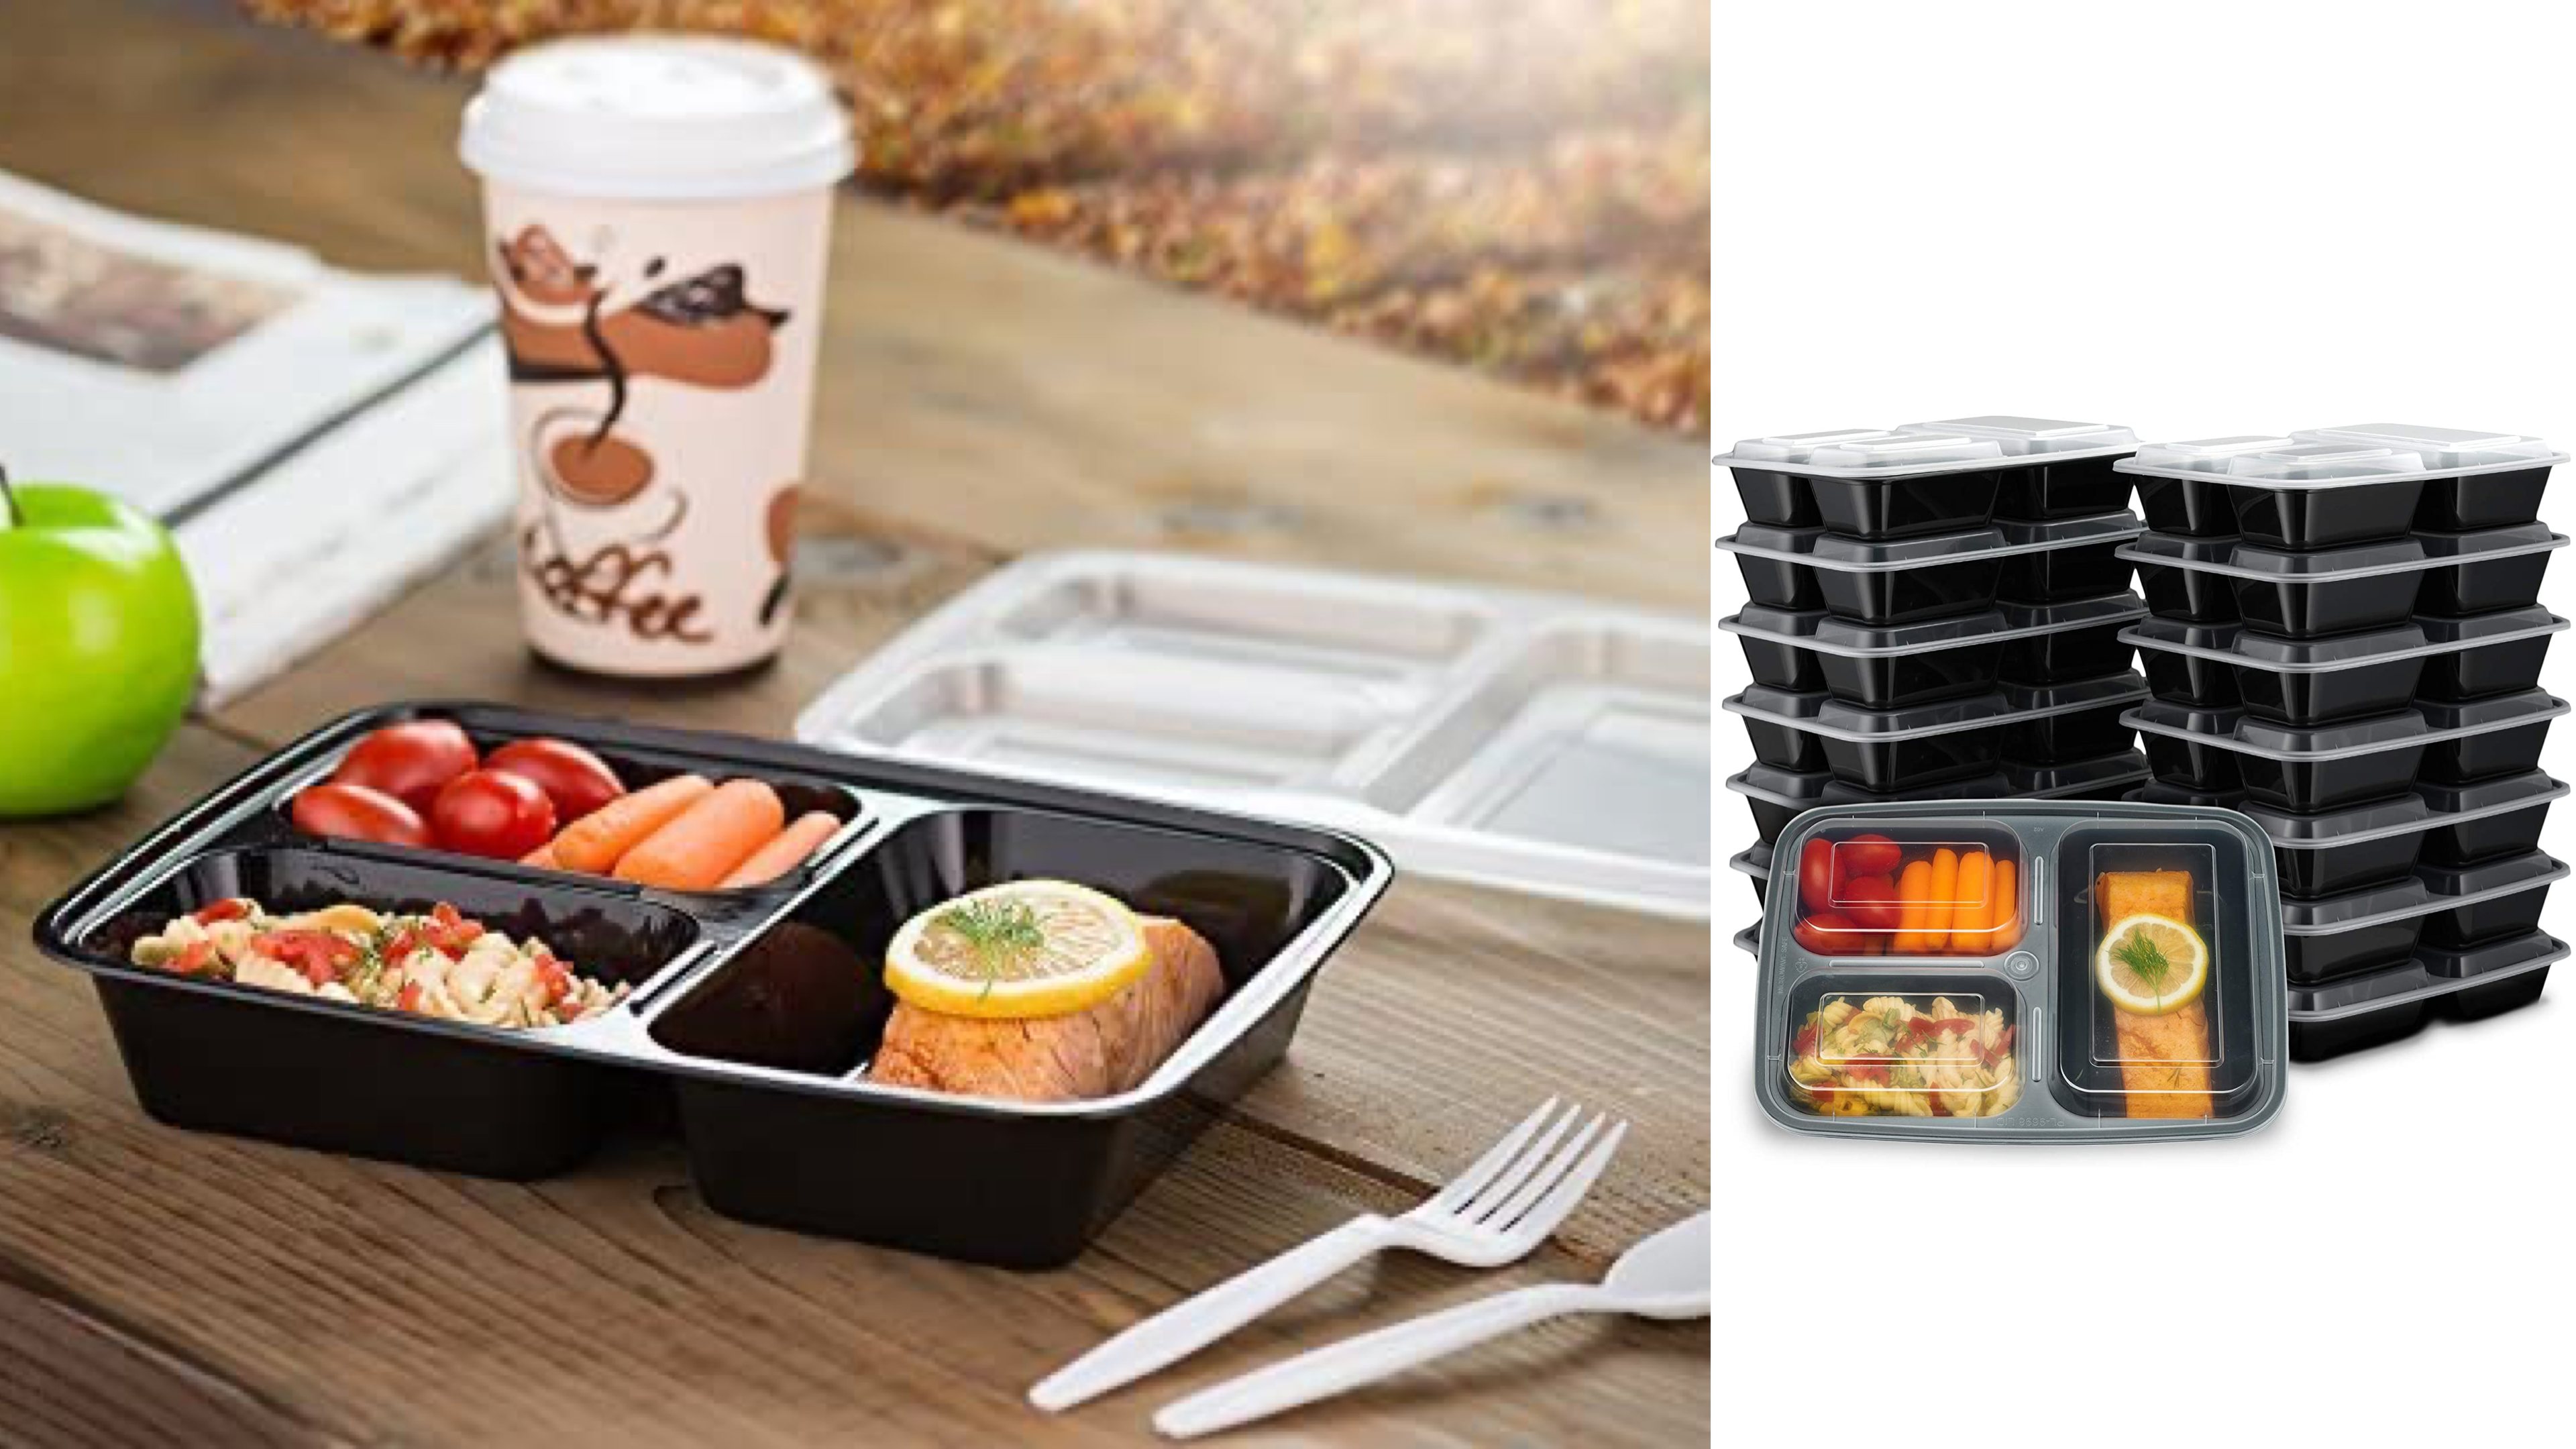 sectioned food storage containers with lids that are microwave safe